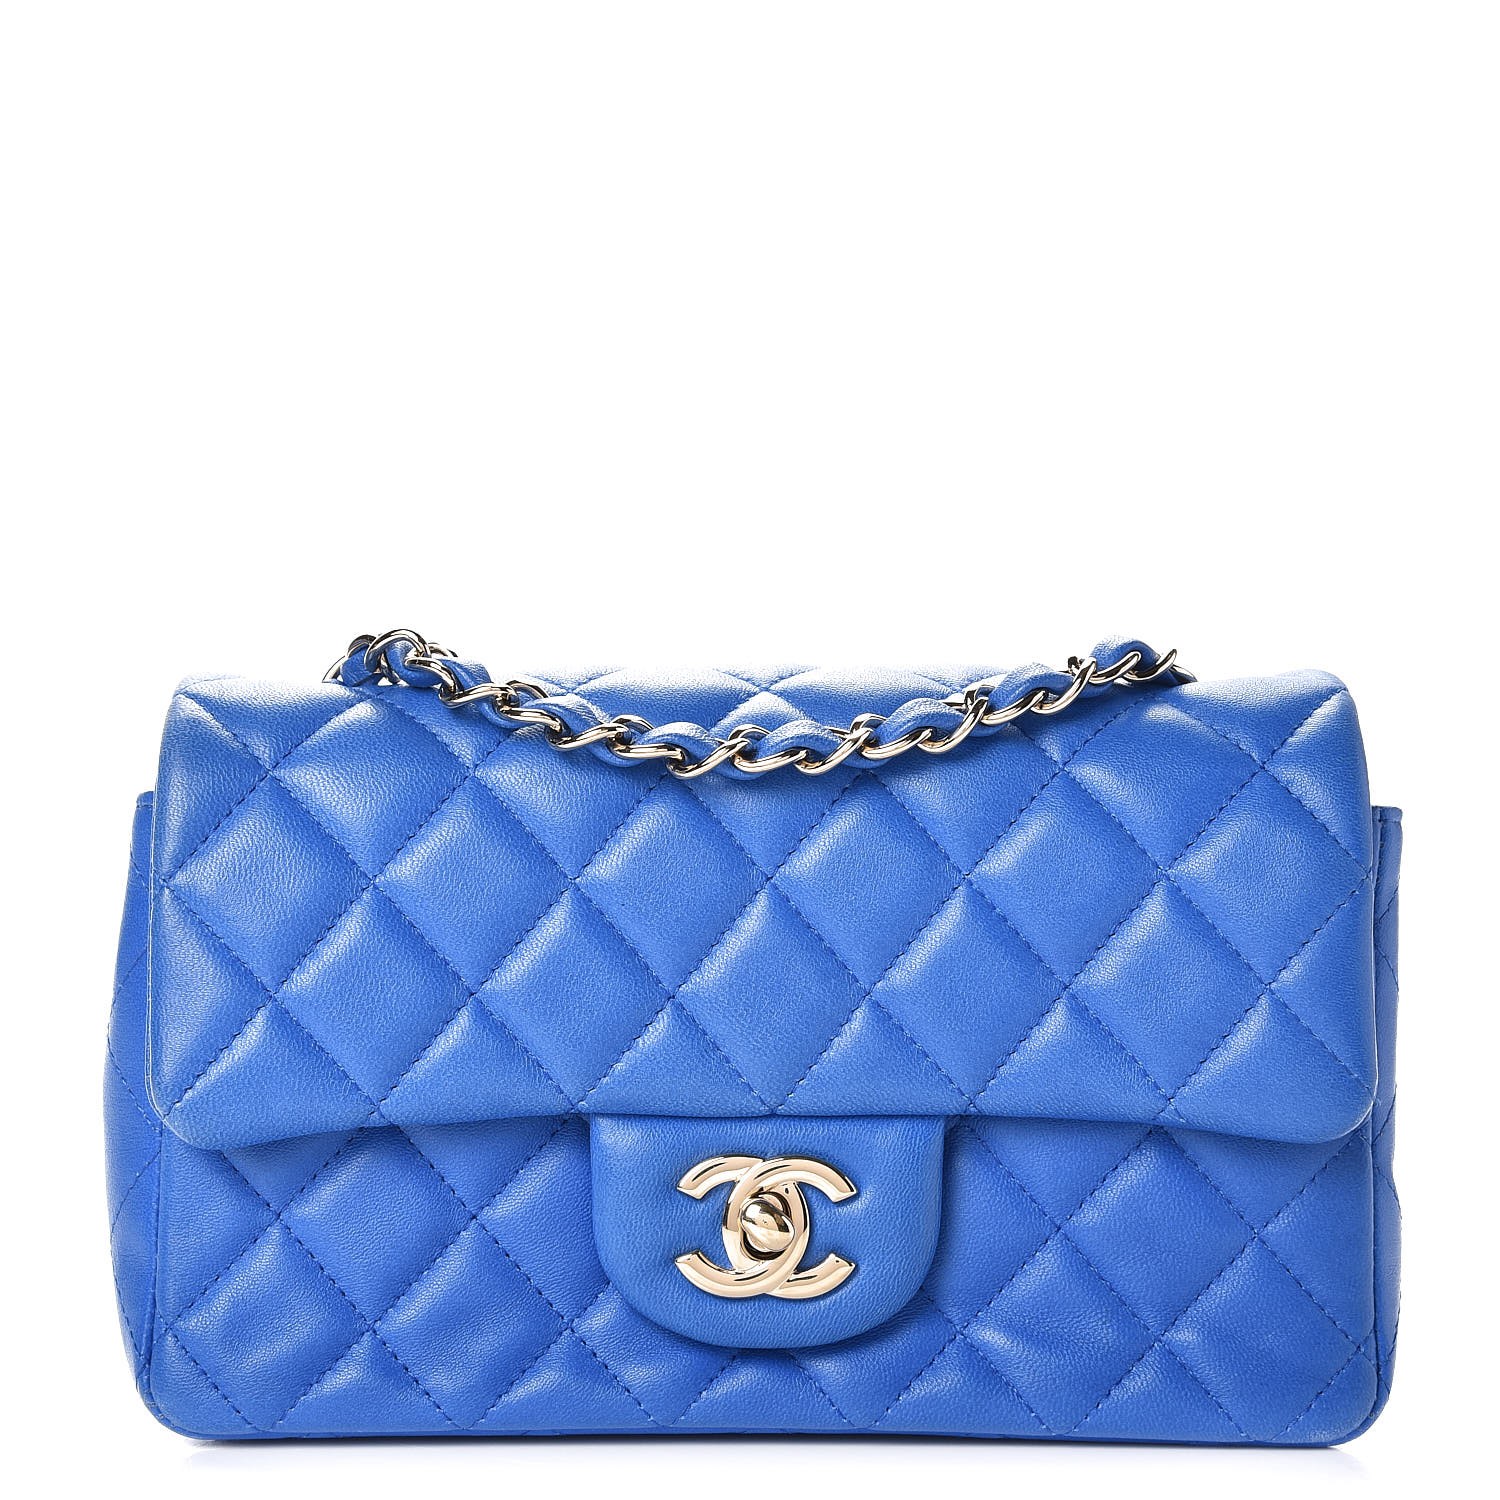 CHANEL Lambskin Quilted Rectangular Mini Flap Blue 272603